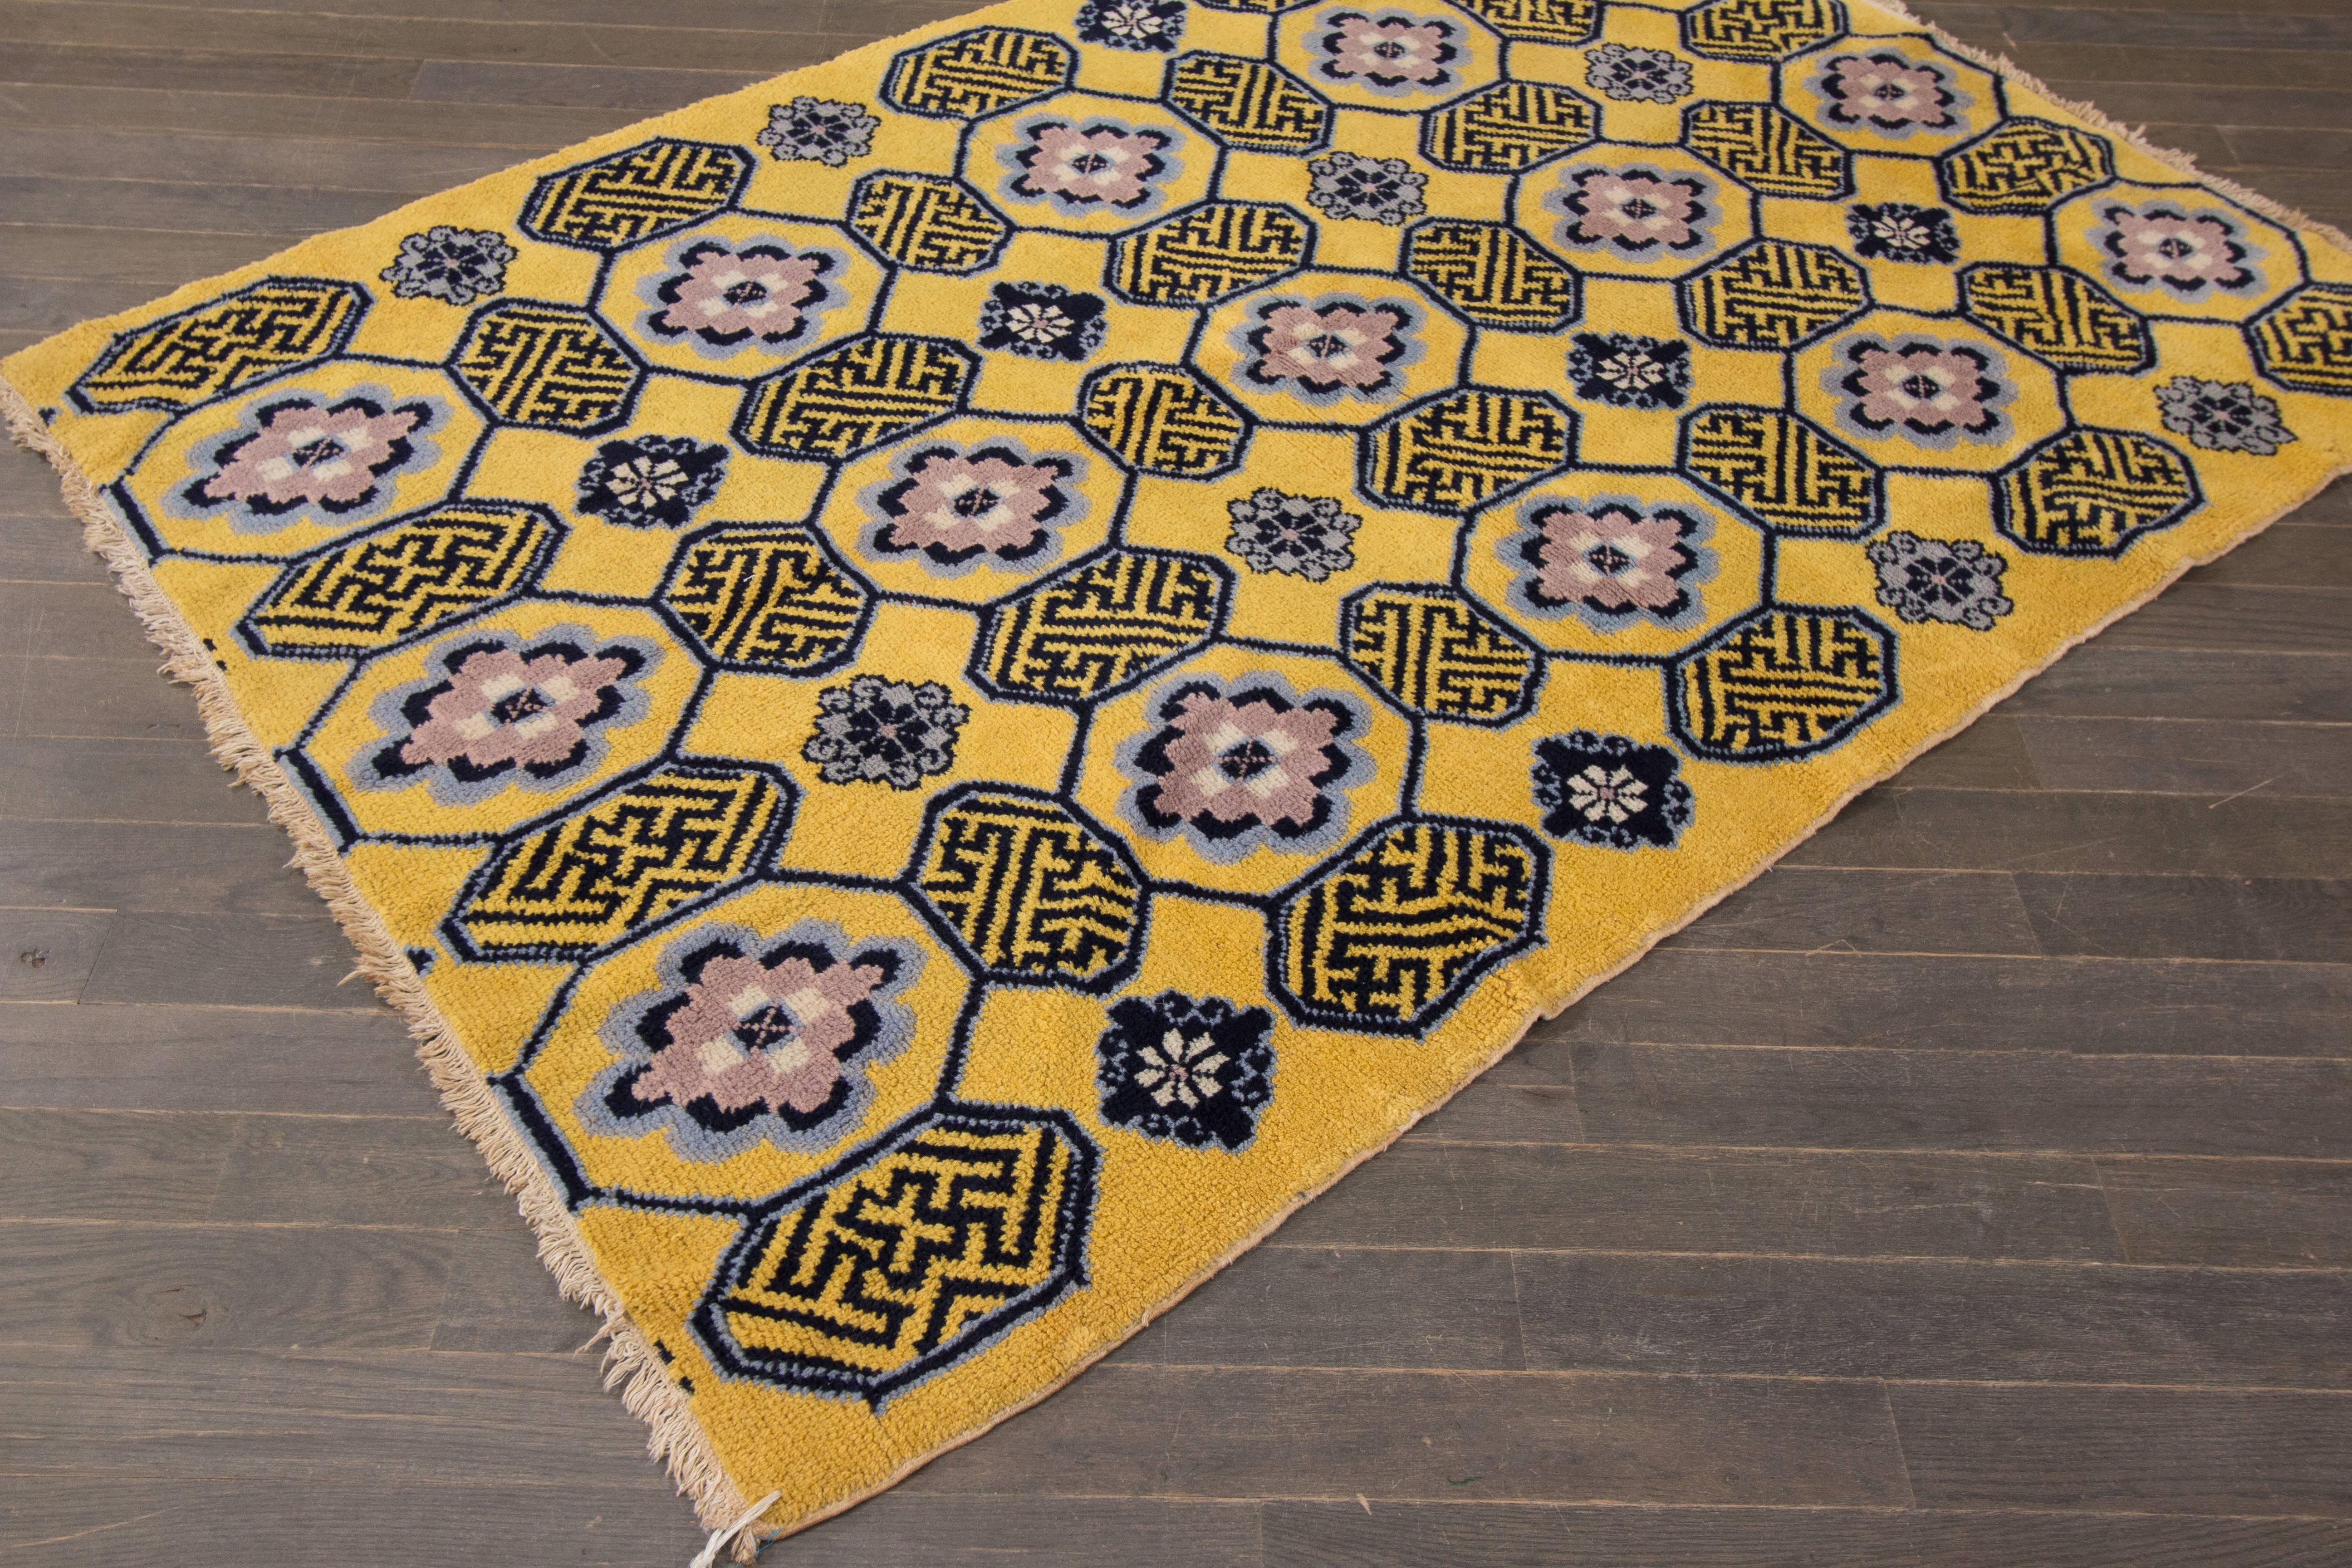 Vintage 1950s Chinese carpet with a mustard-yellow field and blue/gray geometric pattern throughout. Measures 4.05x6.04.